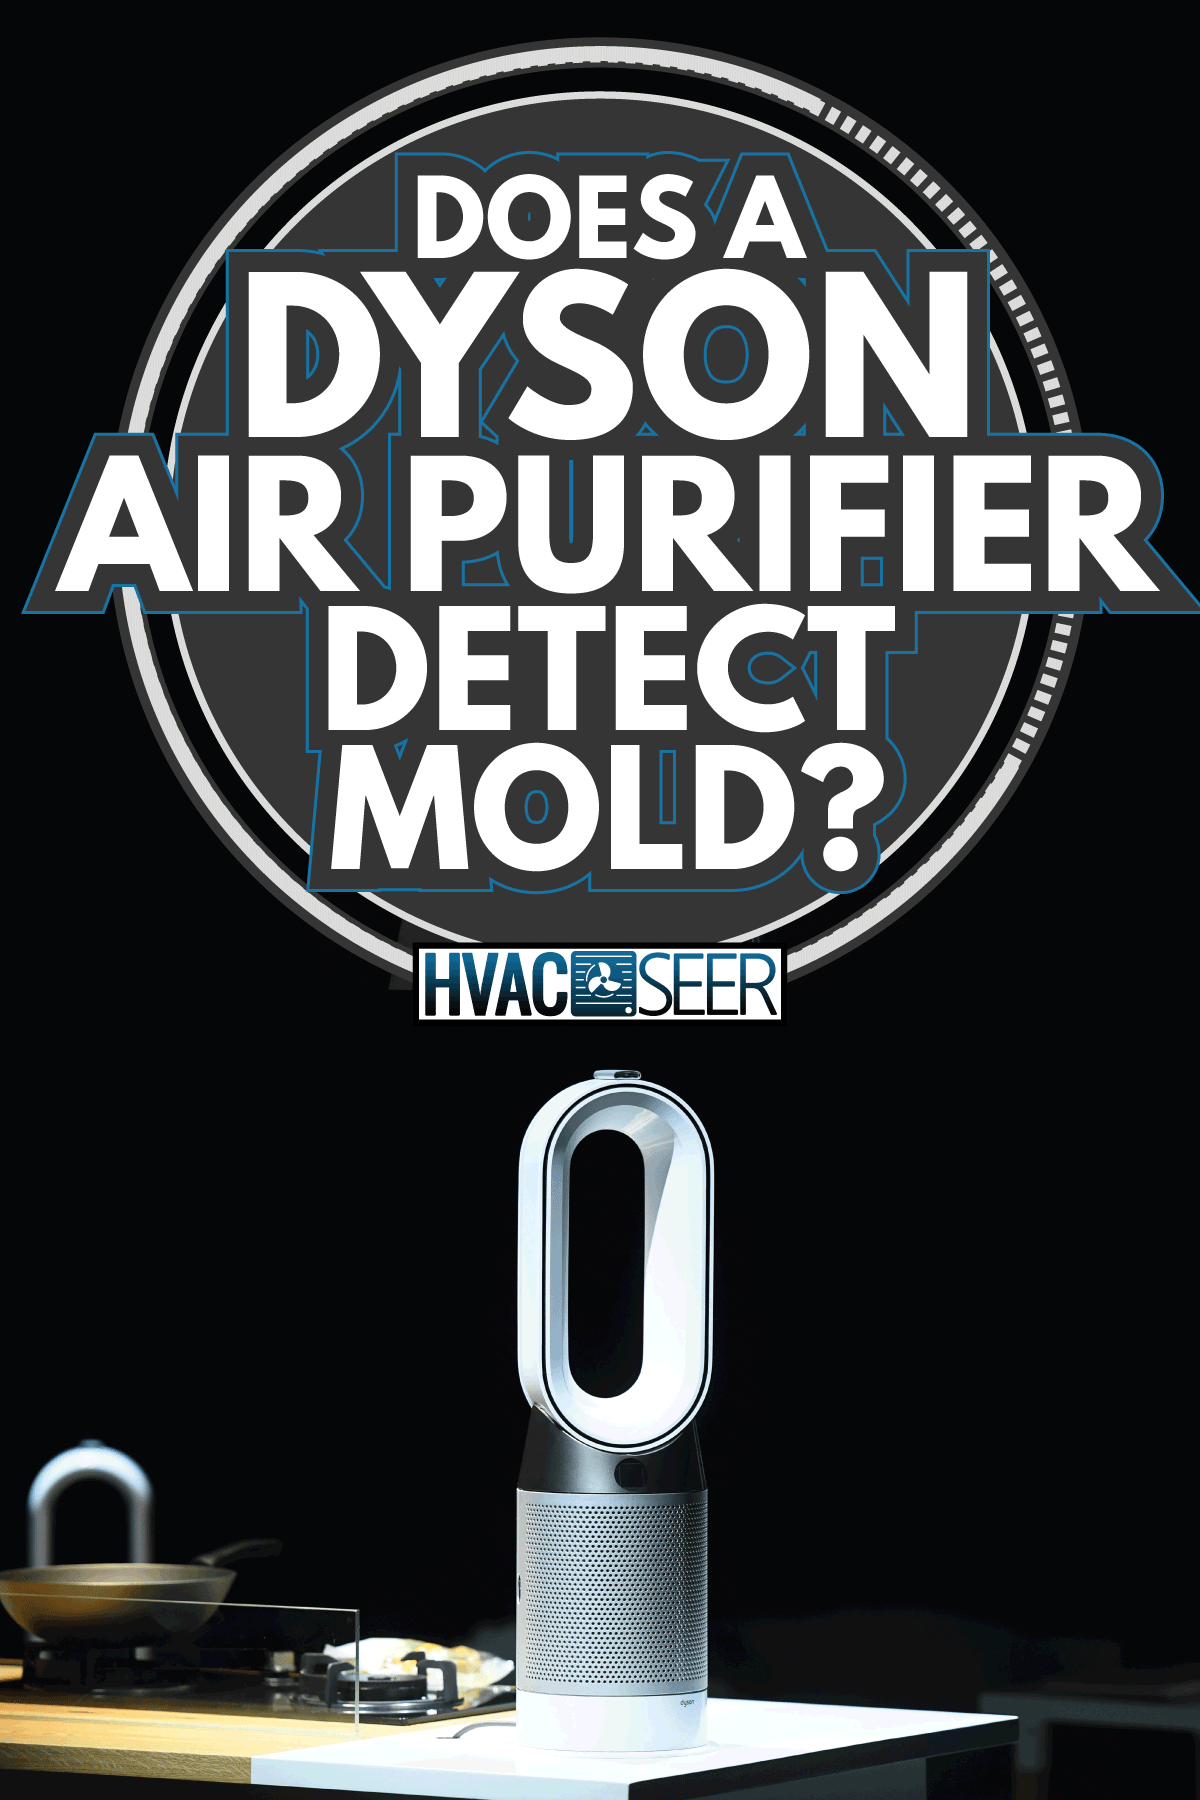 A Dyson Pure Hot and Cool is on display at Dyson's new product launch event. Does A Dyson Air Purifier Detect Mold